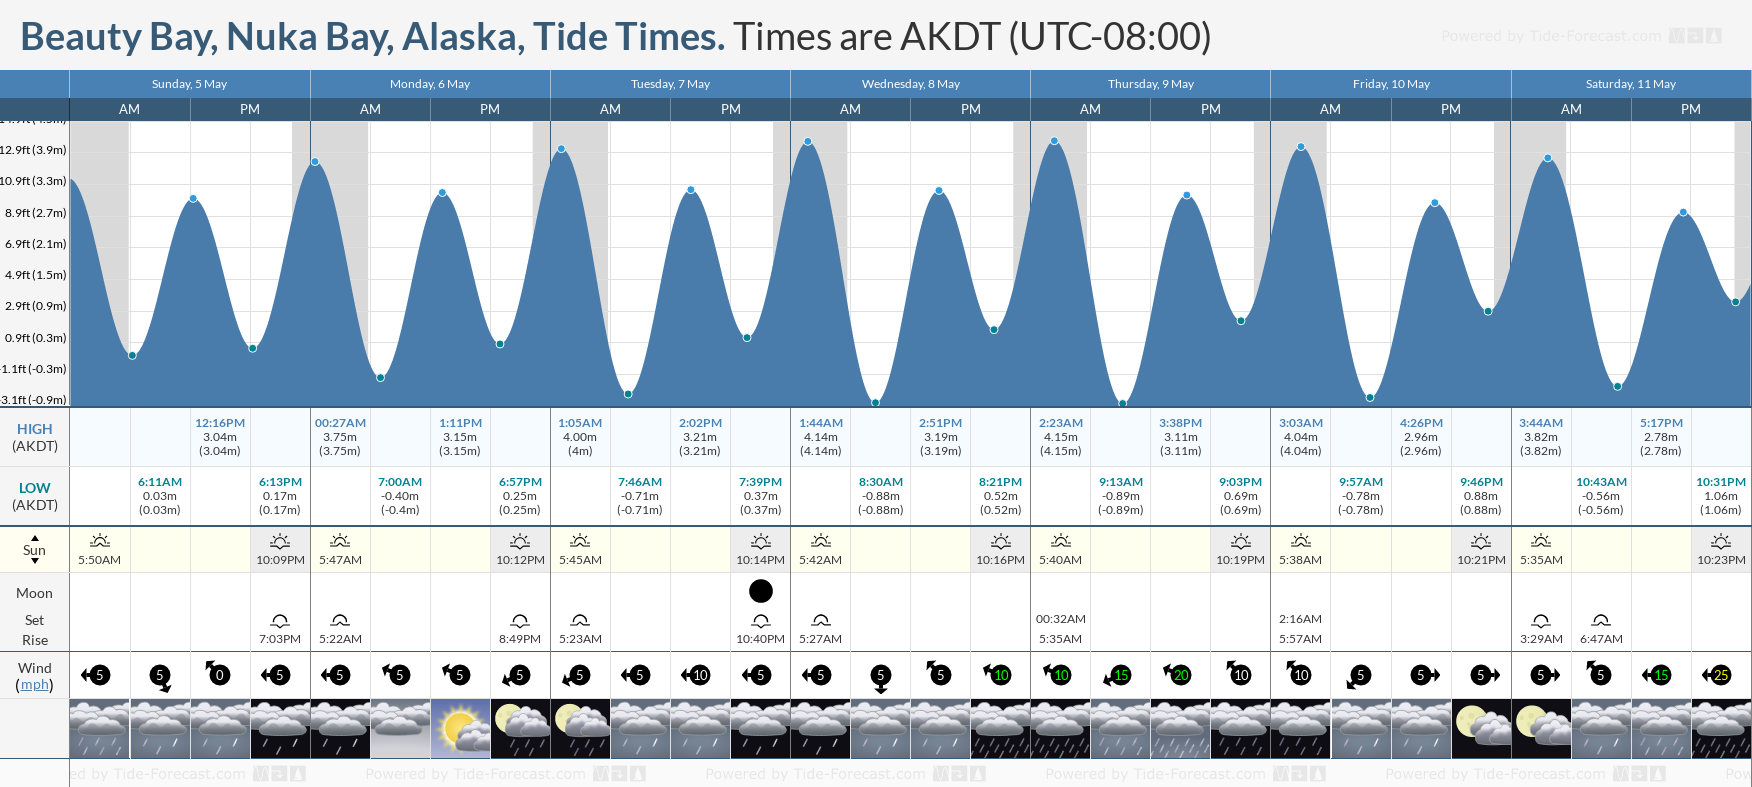 Beauty Bay, Nuka Bay, Alaska Tide Chart including high and low tide tide times for the next 7 days